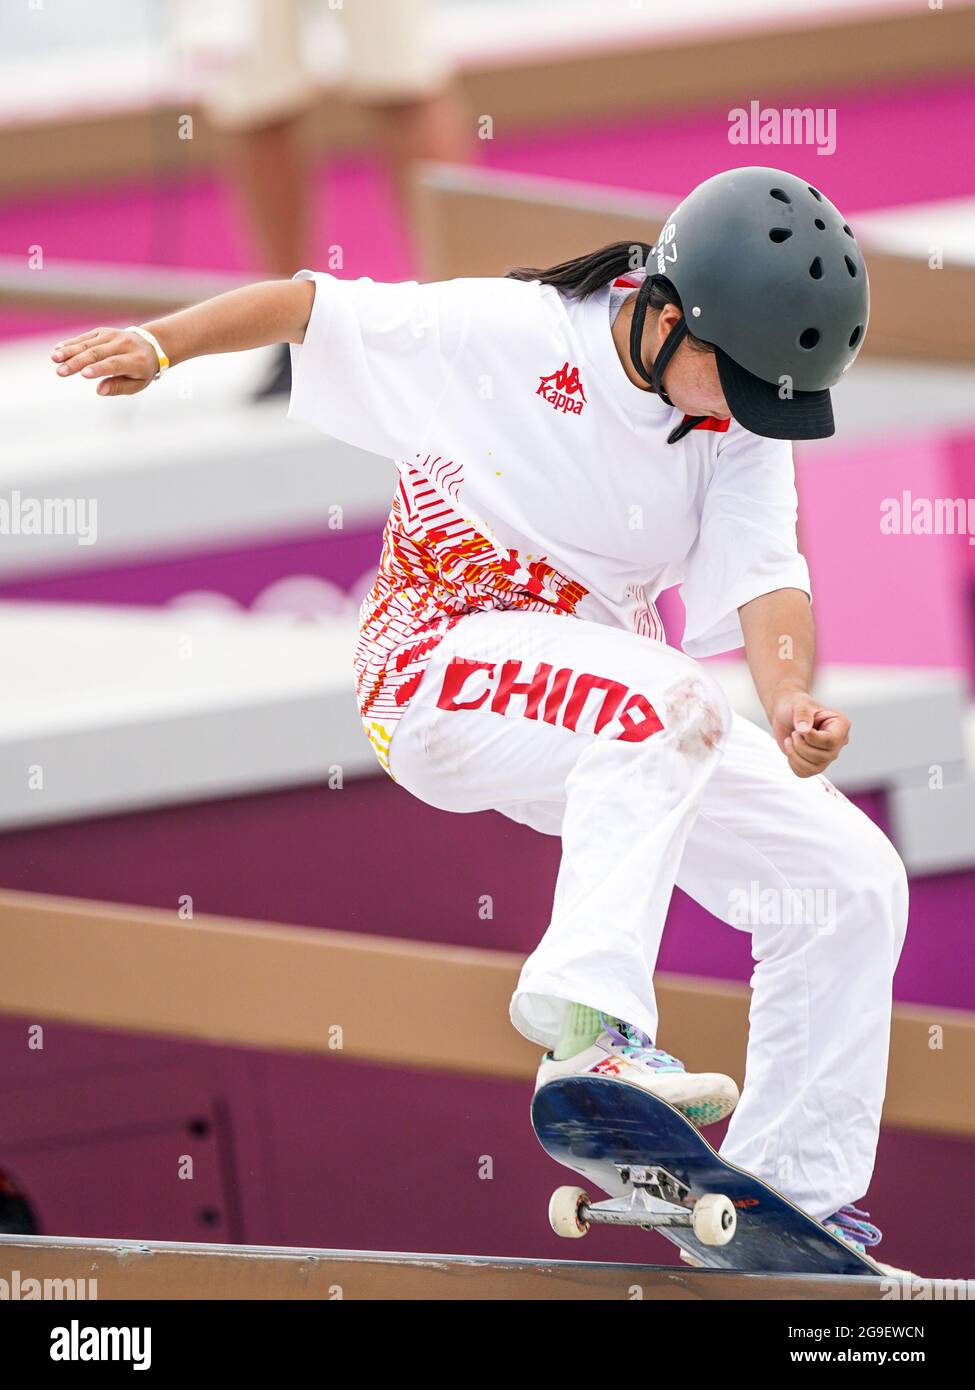 TOKYO, - JULY 26: Wenhui Zeng China competing on Women's Street Final during the Tokyo 2020 Olympic at the Ariake Sports Park Skateboarding on July 26, 2021 in Tokyo,